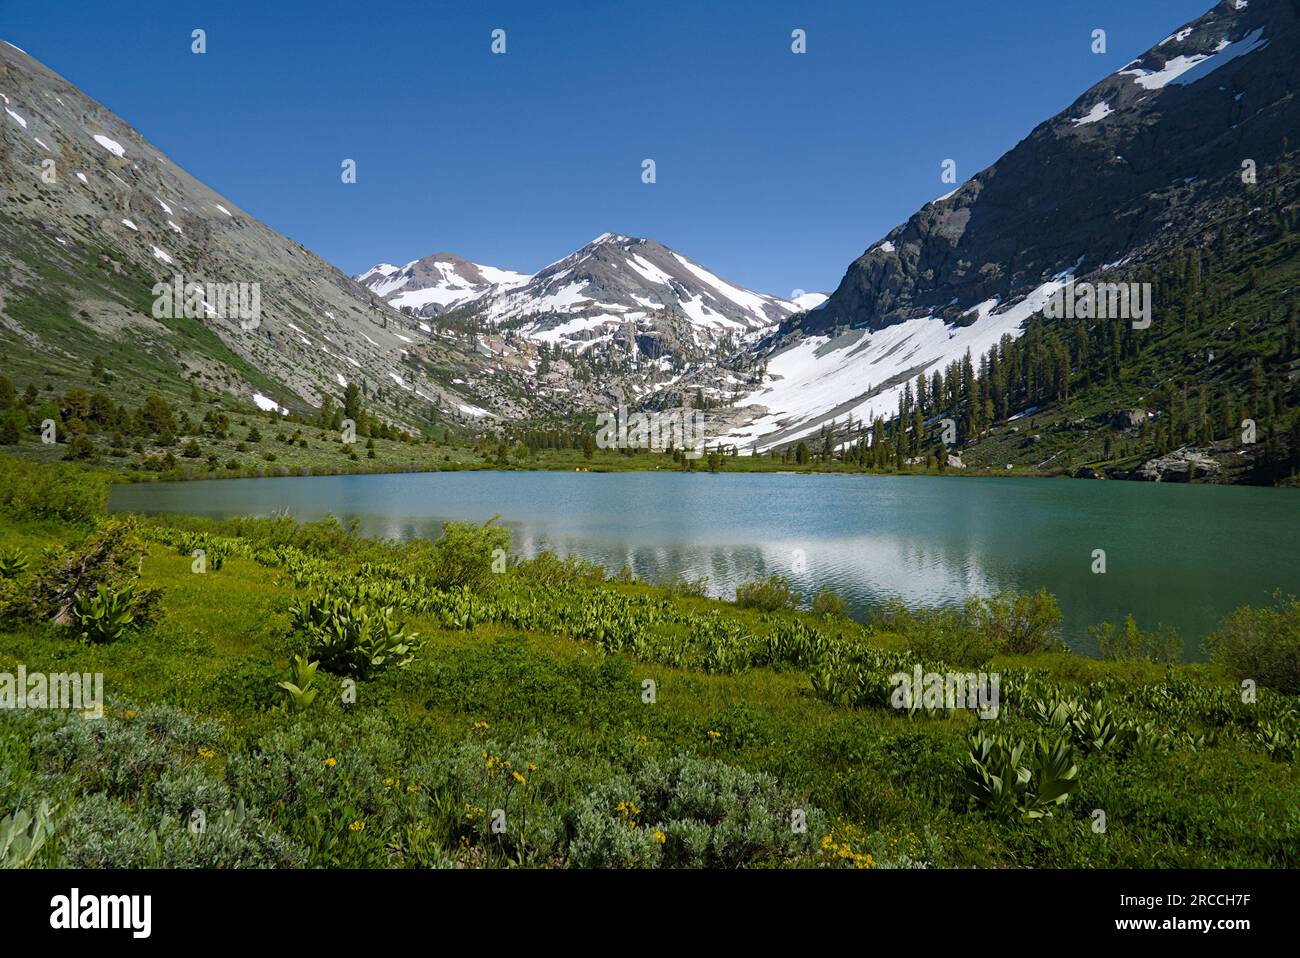 Kennedy lake surrounded by the snow covered alpine mountains. Stock Photo